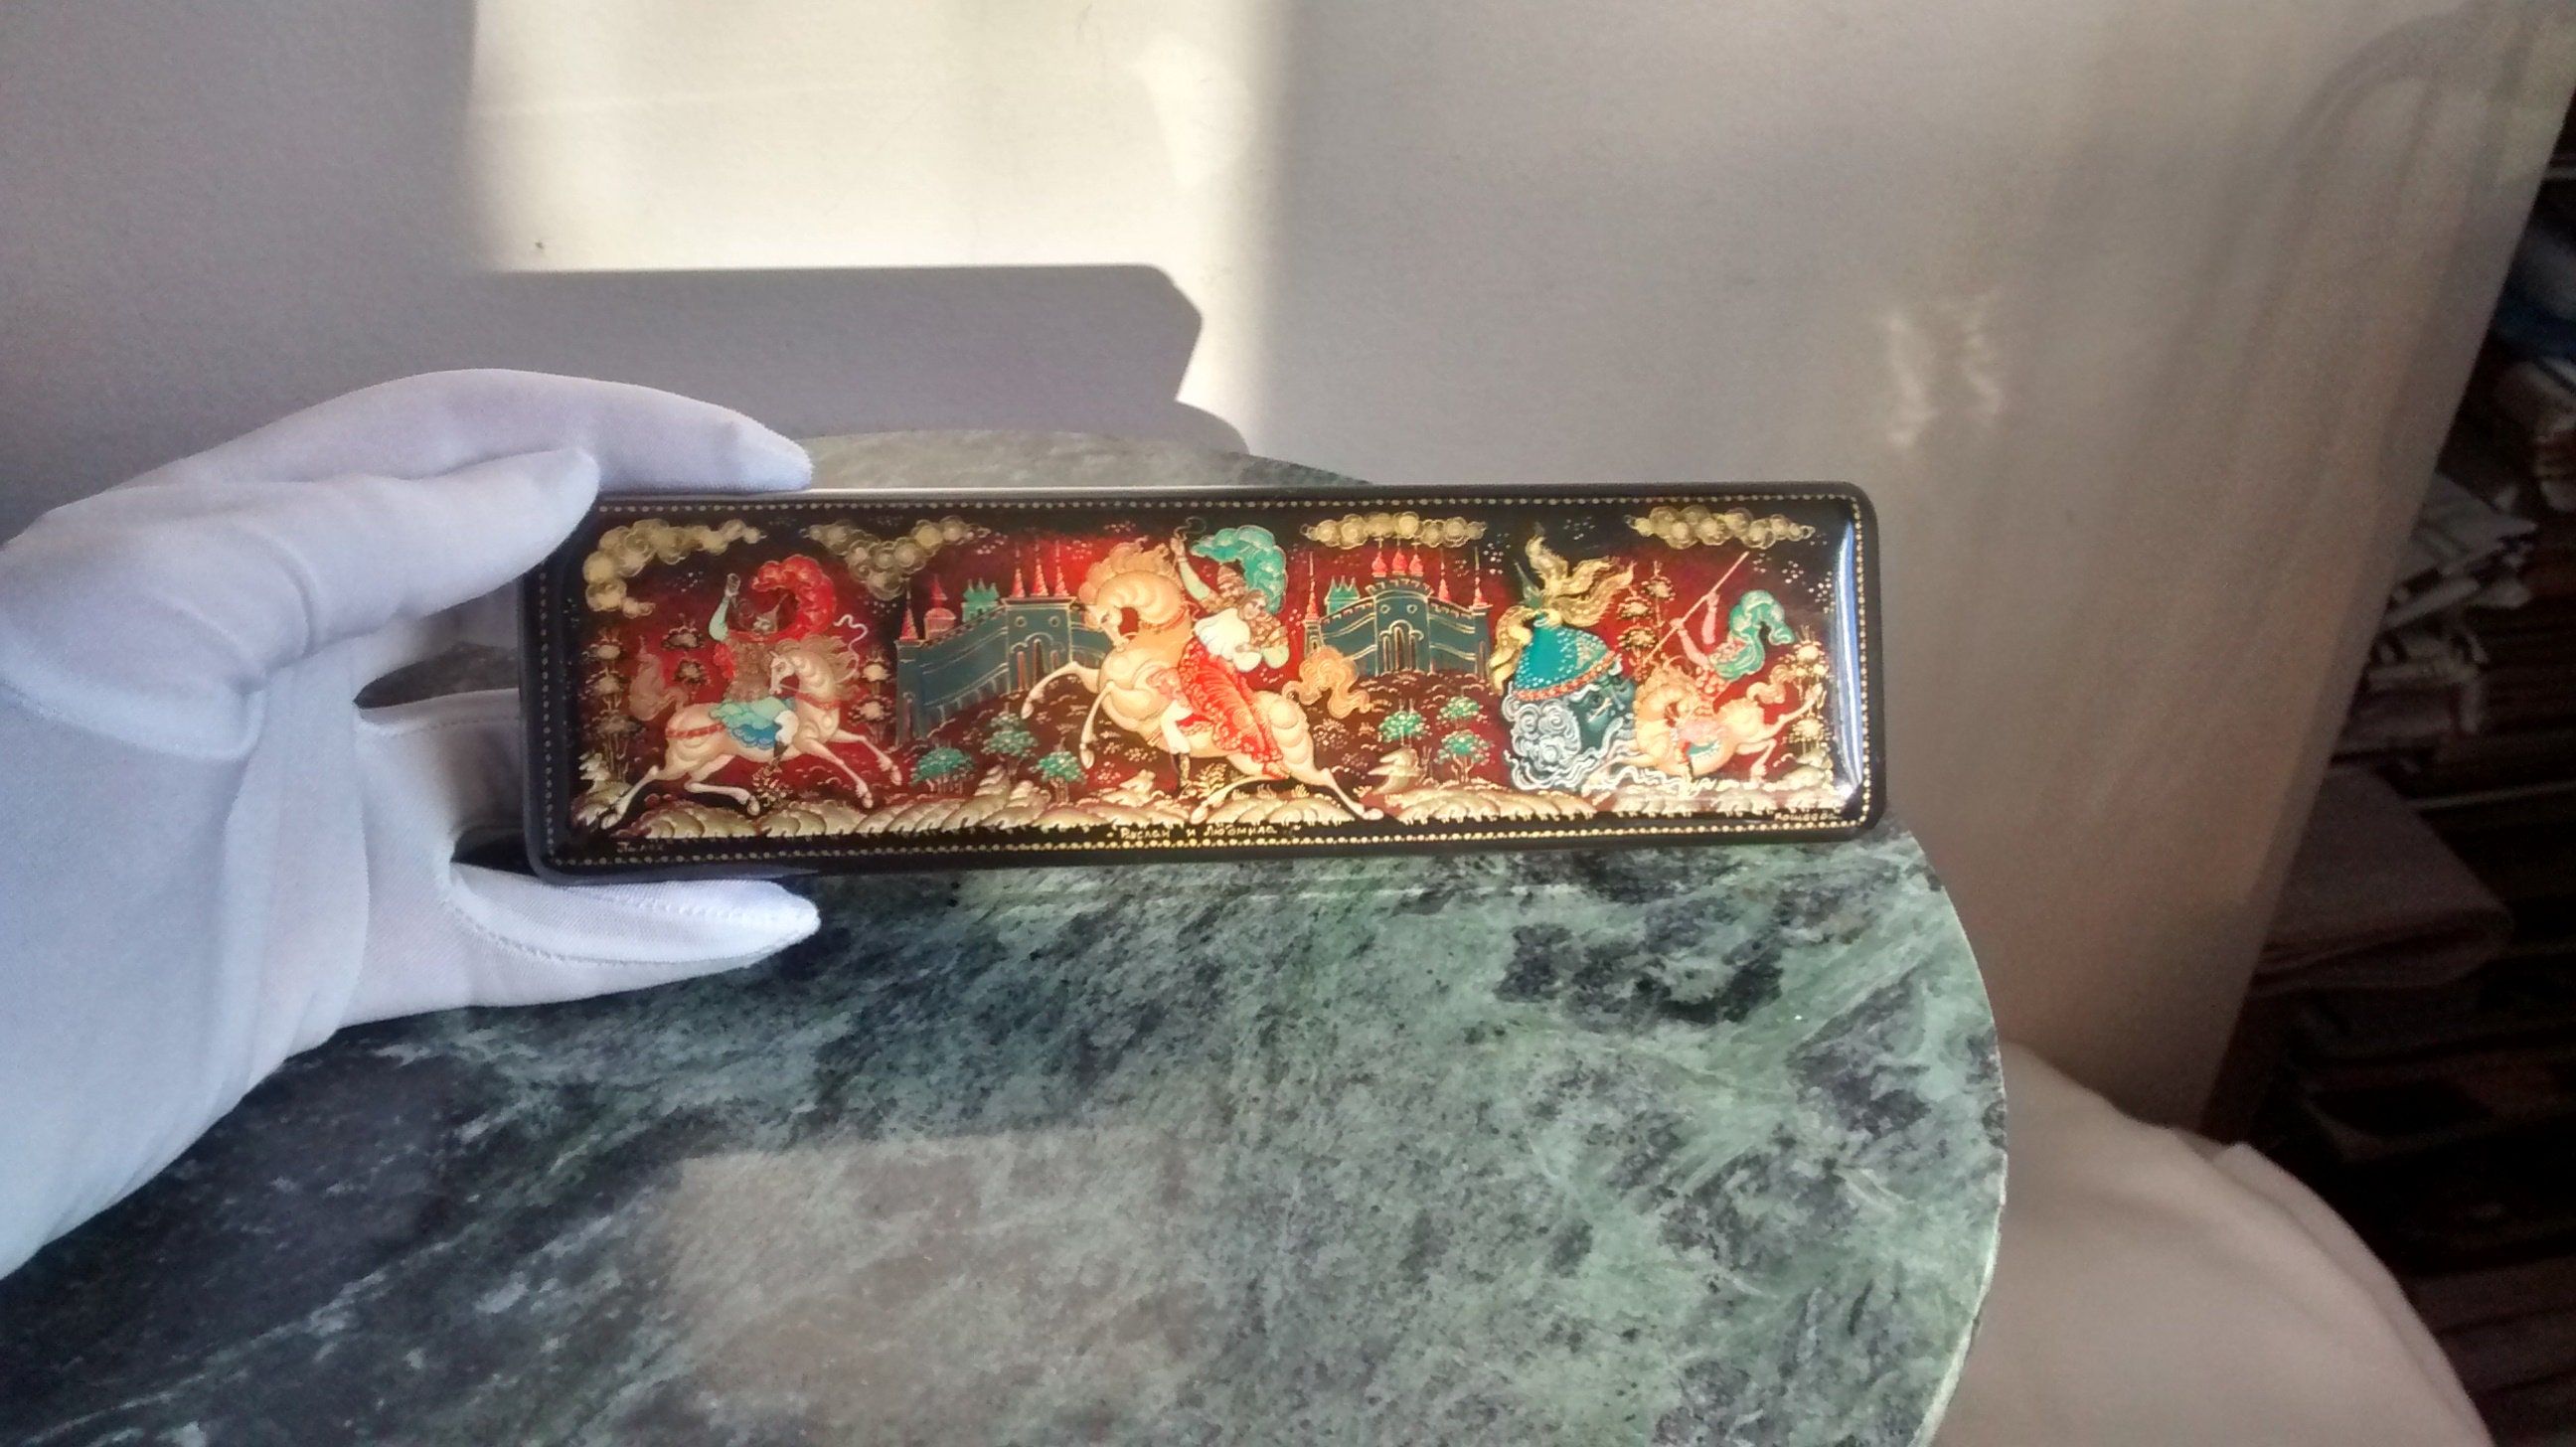 Authentic Russian Lacquer Box Palekh Scene From Ruslan and - Etsy